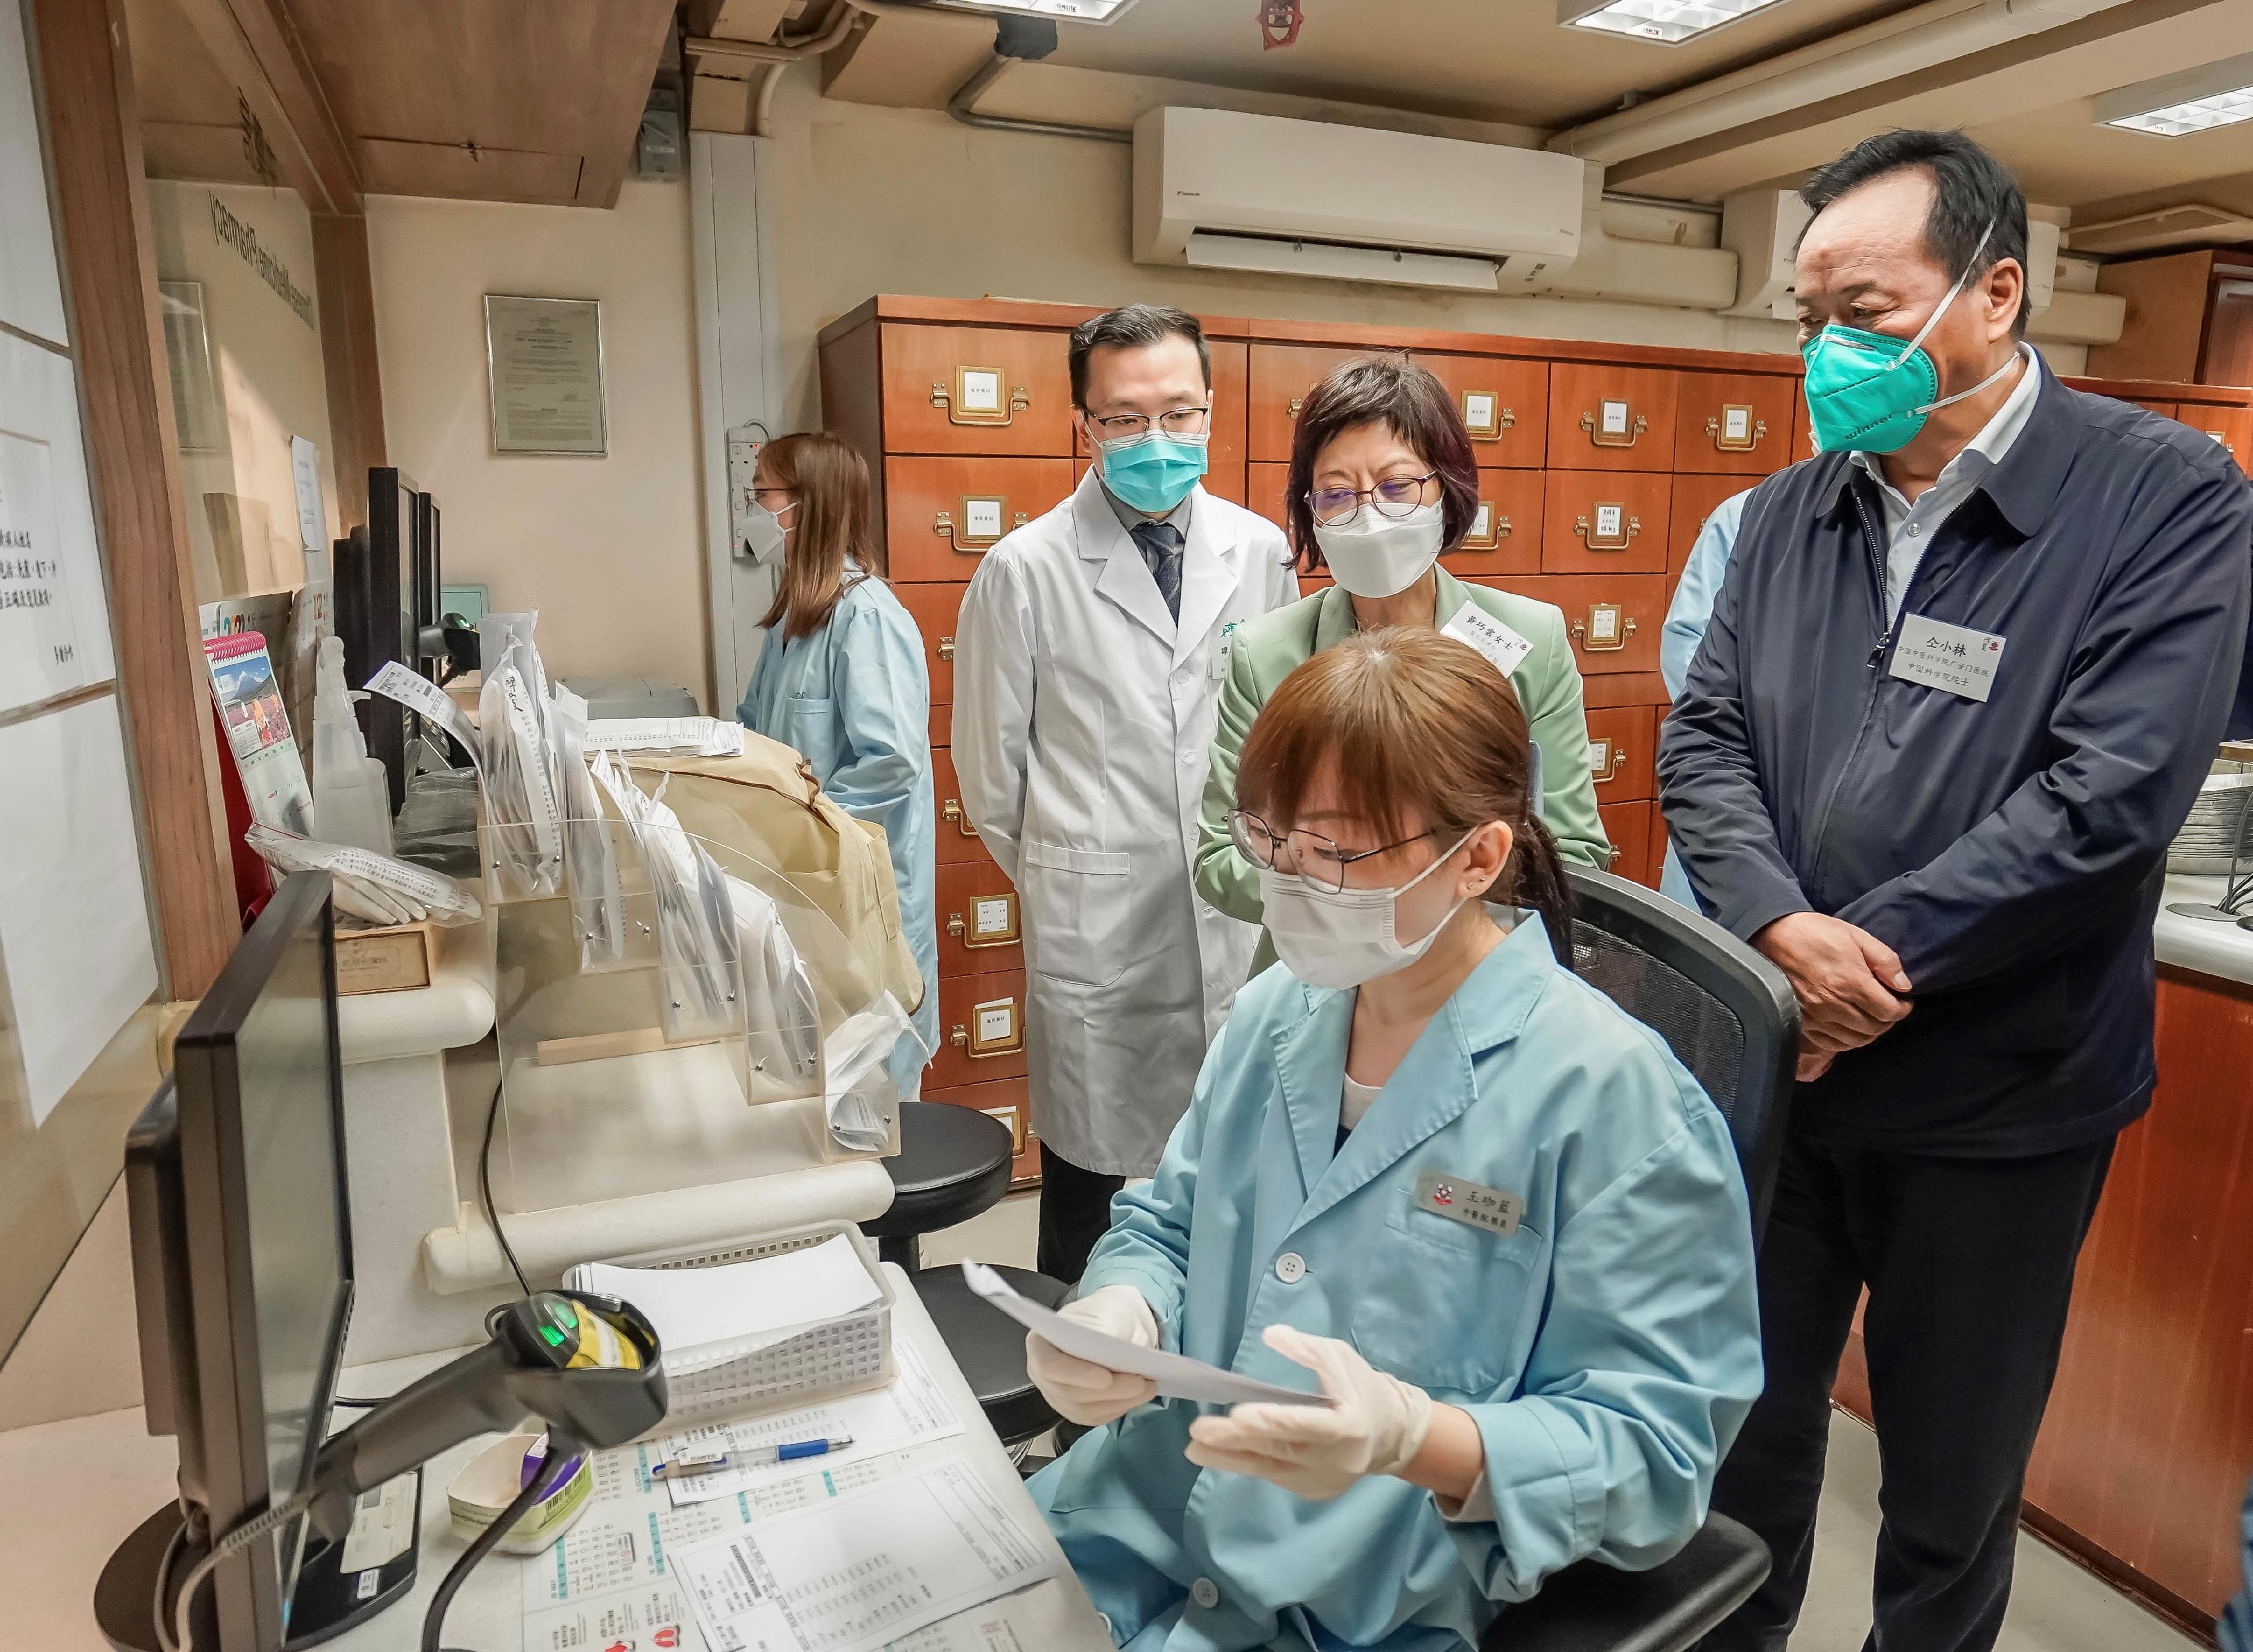 The Mainland Chinese medicine expert group of the Central Authorities today (March 31) visited the Chinese Medicine Clinic cum Training and Research Centre to understand the clinic's works on prescribing Chinese medicine.